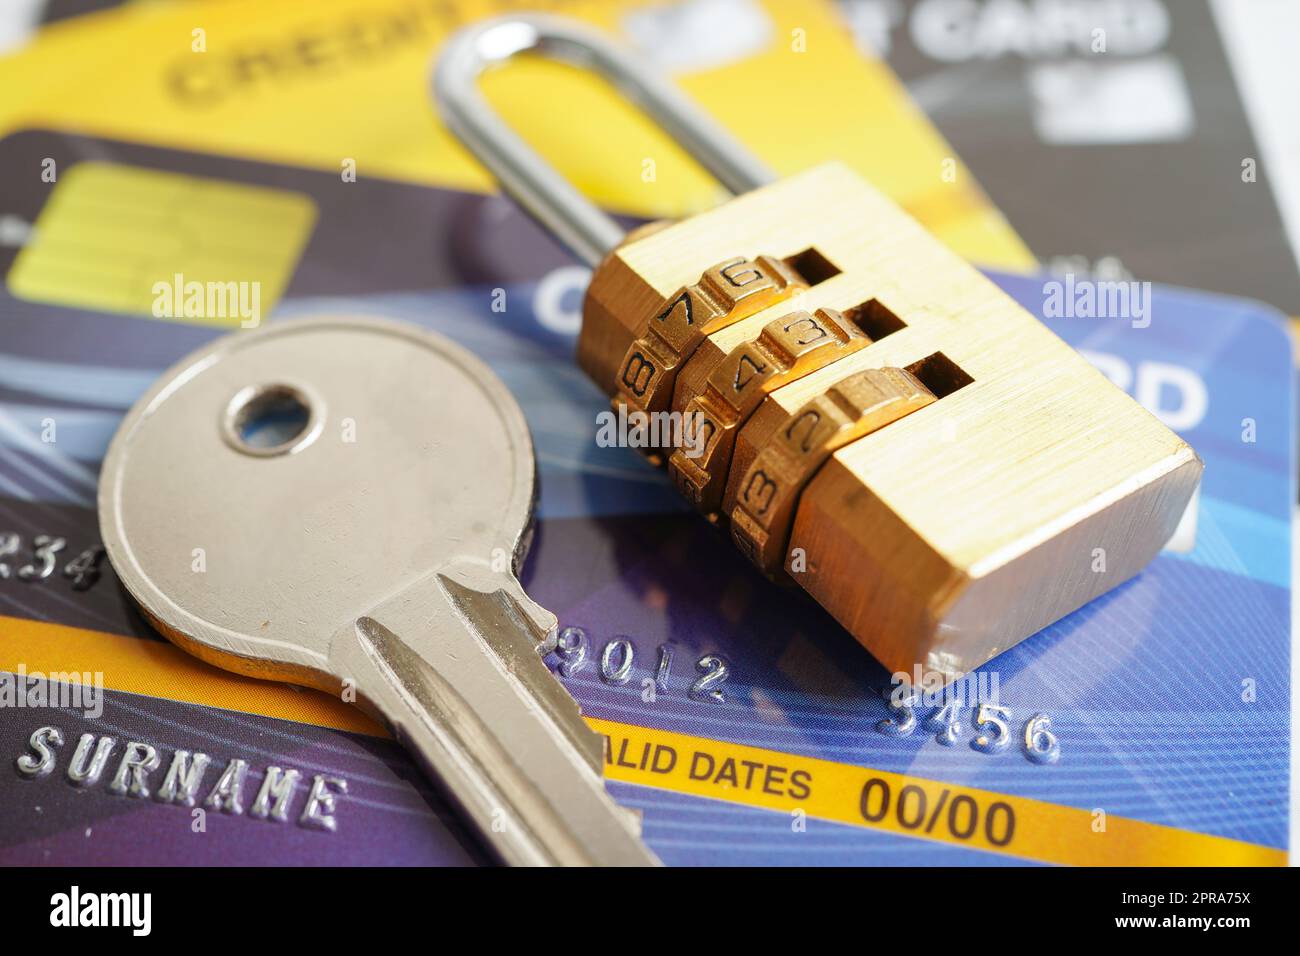 Credit card with password key lock, security finance business concept. Stock Photo